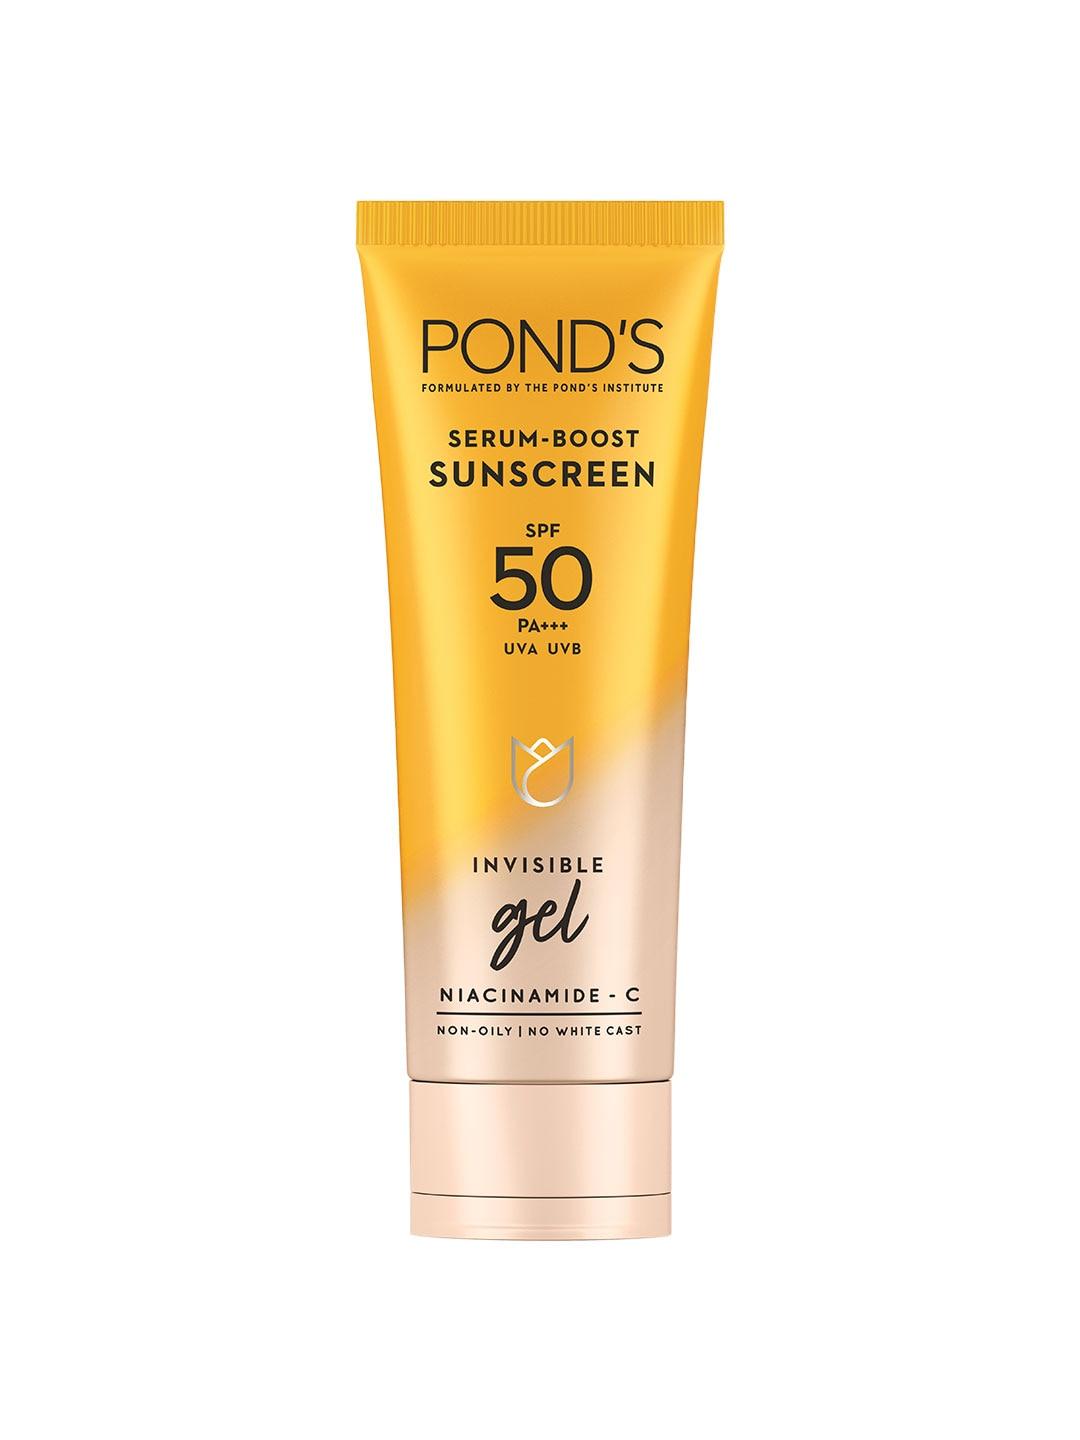 ponds-spf-50-pa++-uva-uvb-serum-boost-invisible-gel-sunscreen-with-niacinamide-c--100g